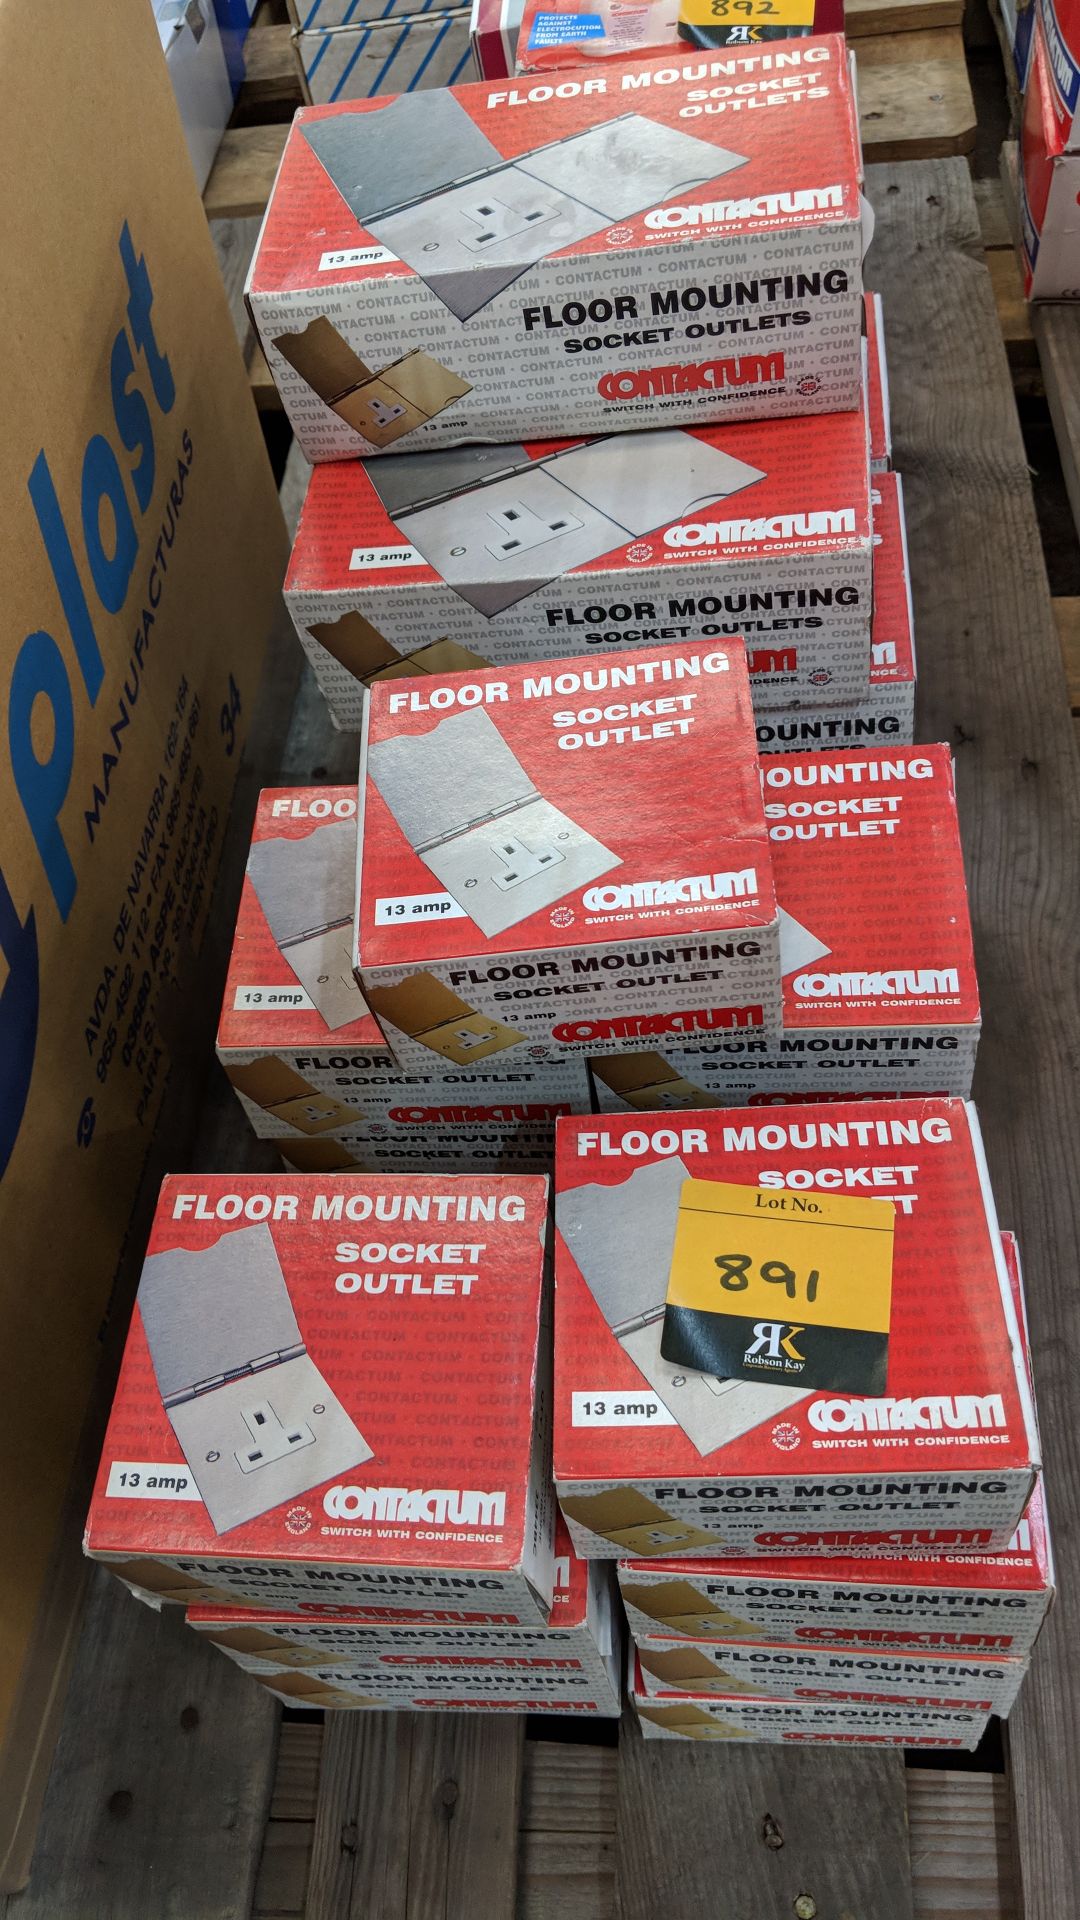 22 assorted boxes of Contactum floor mounting socket outlet product The vast majority of products in